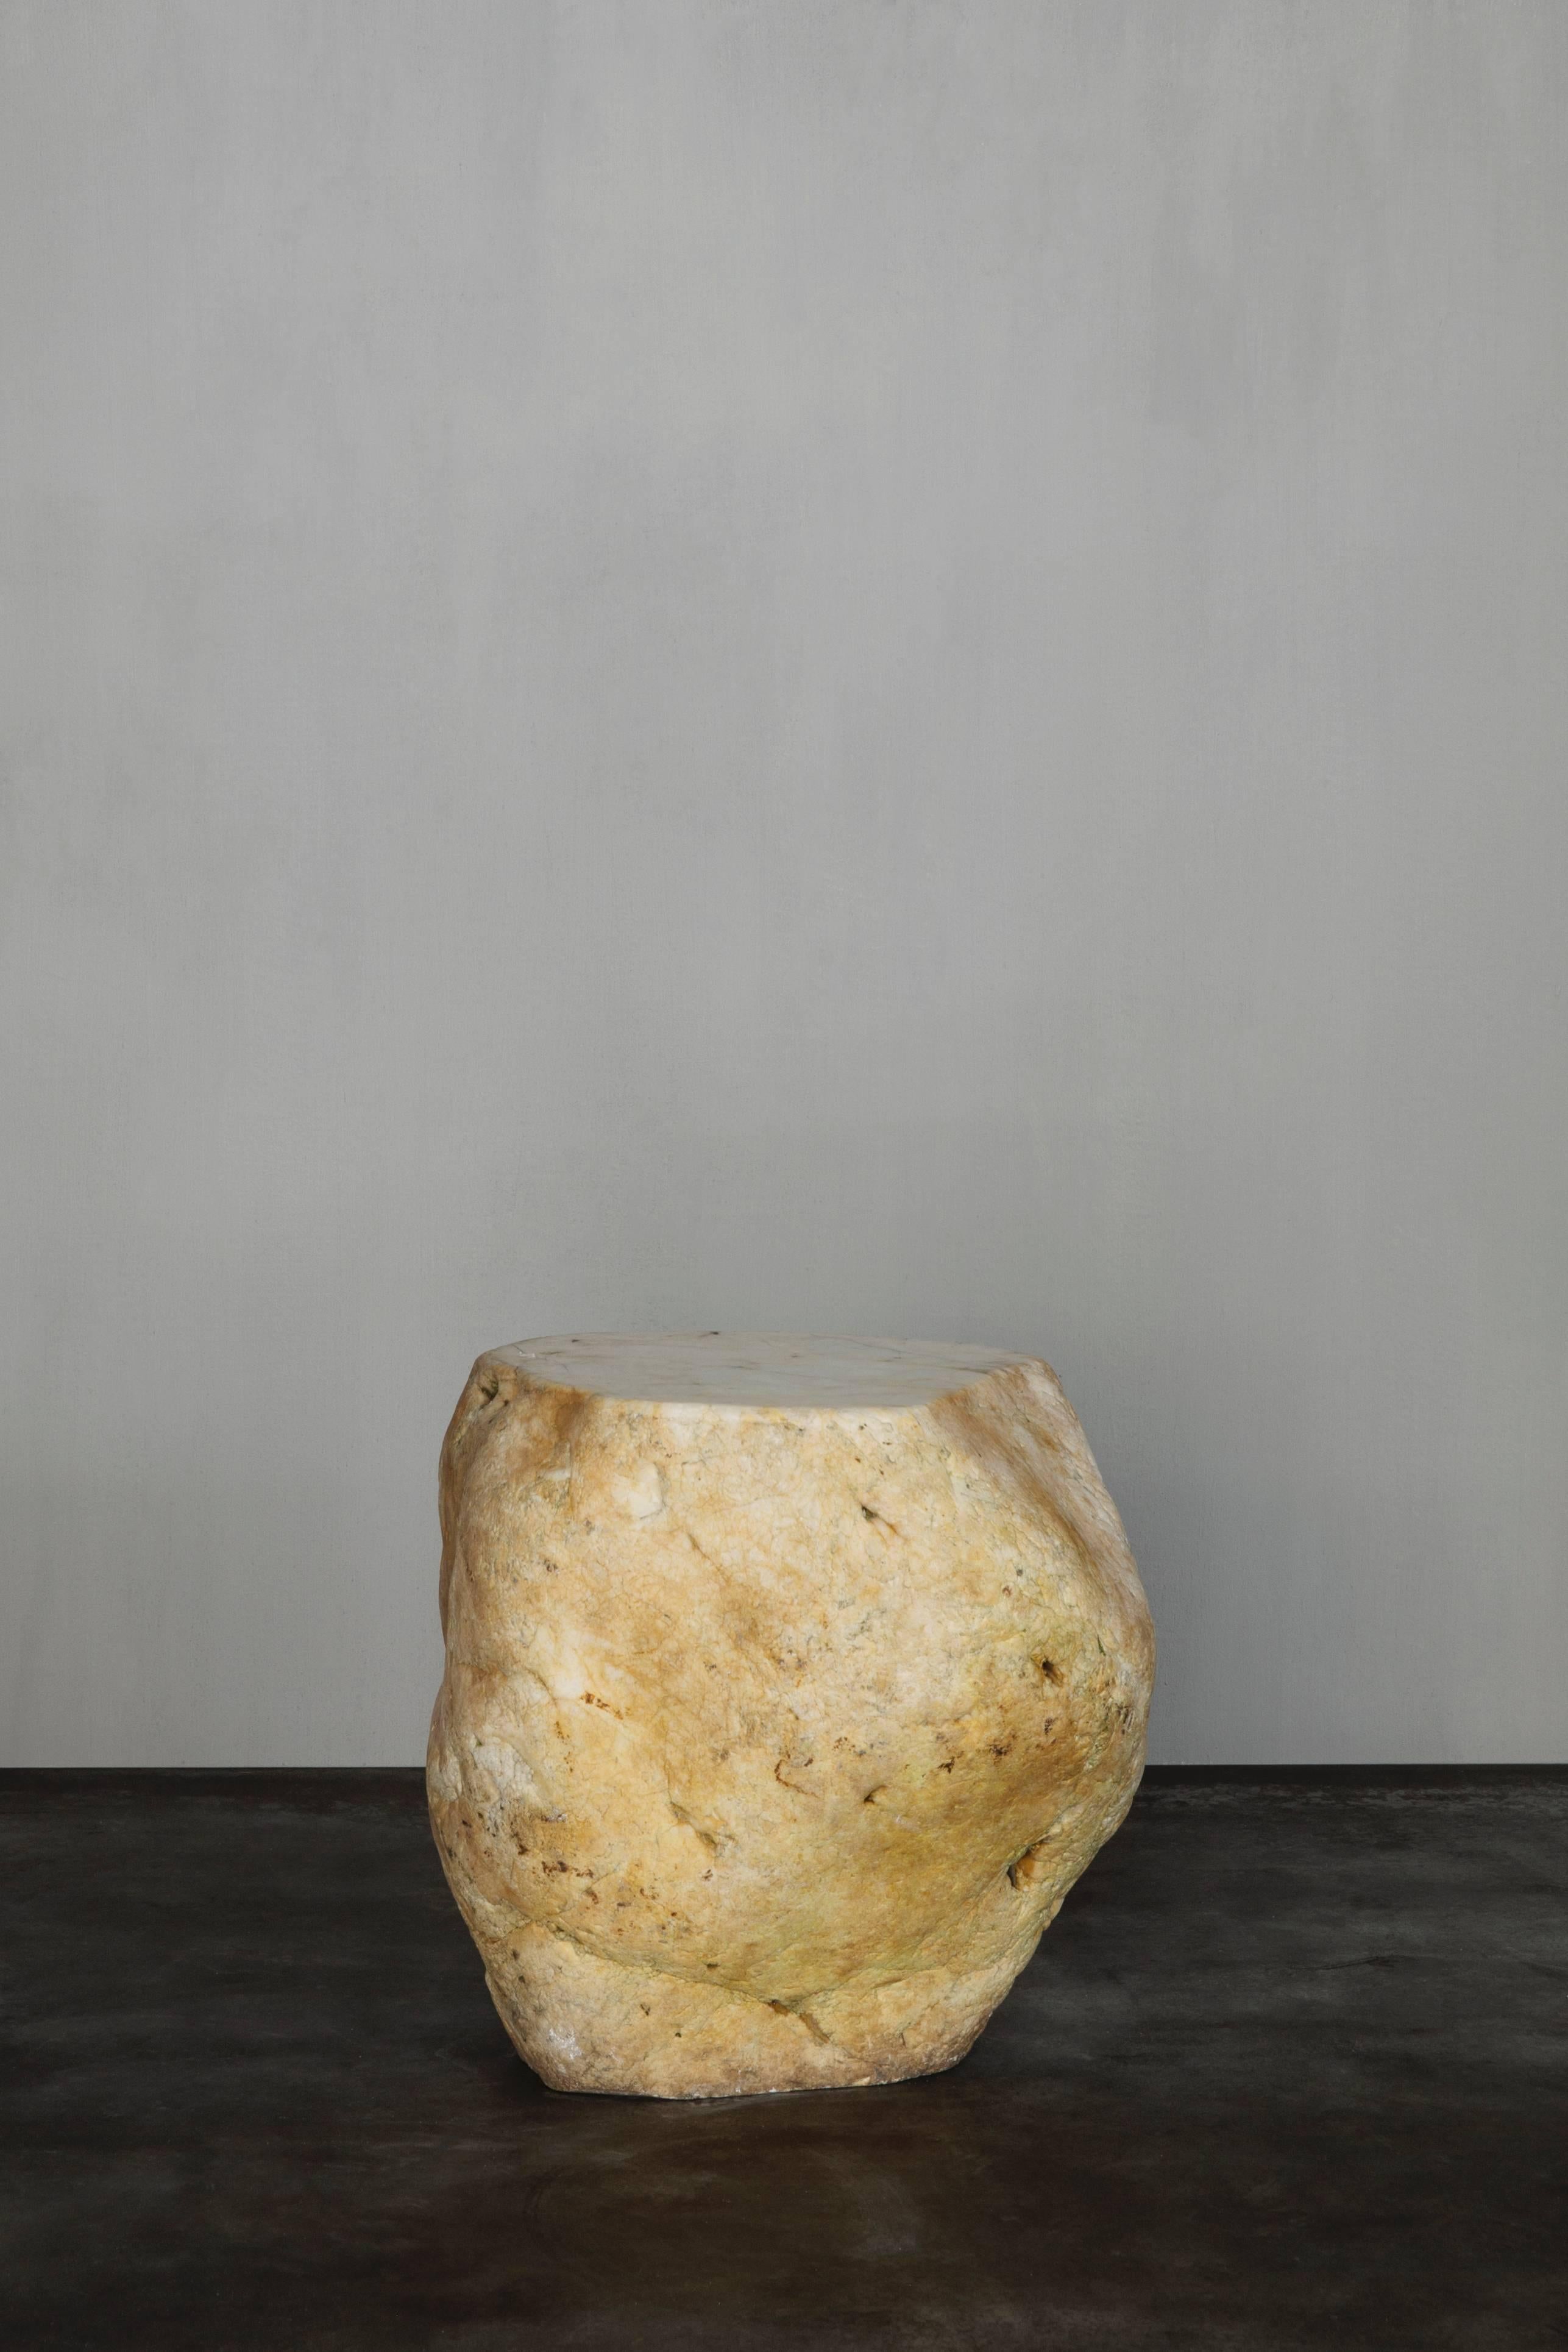 Beautiful stool in white Japanese marble from mid-20th century.